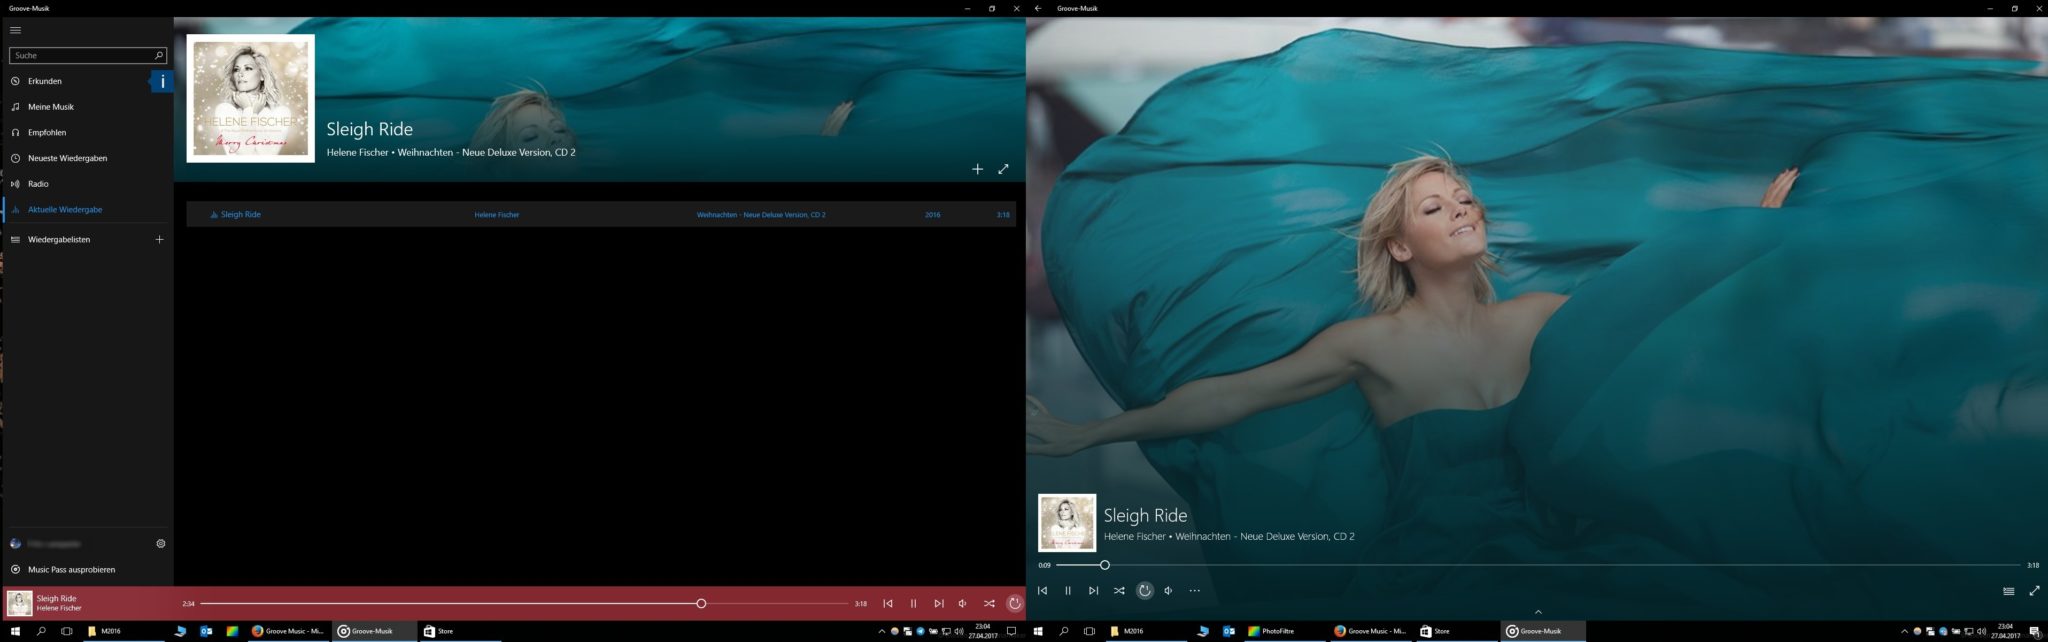 Groove Music Player Update 1